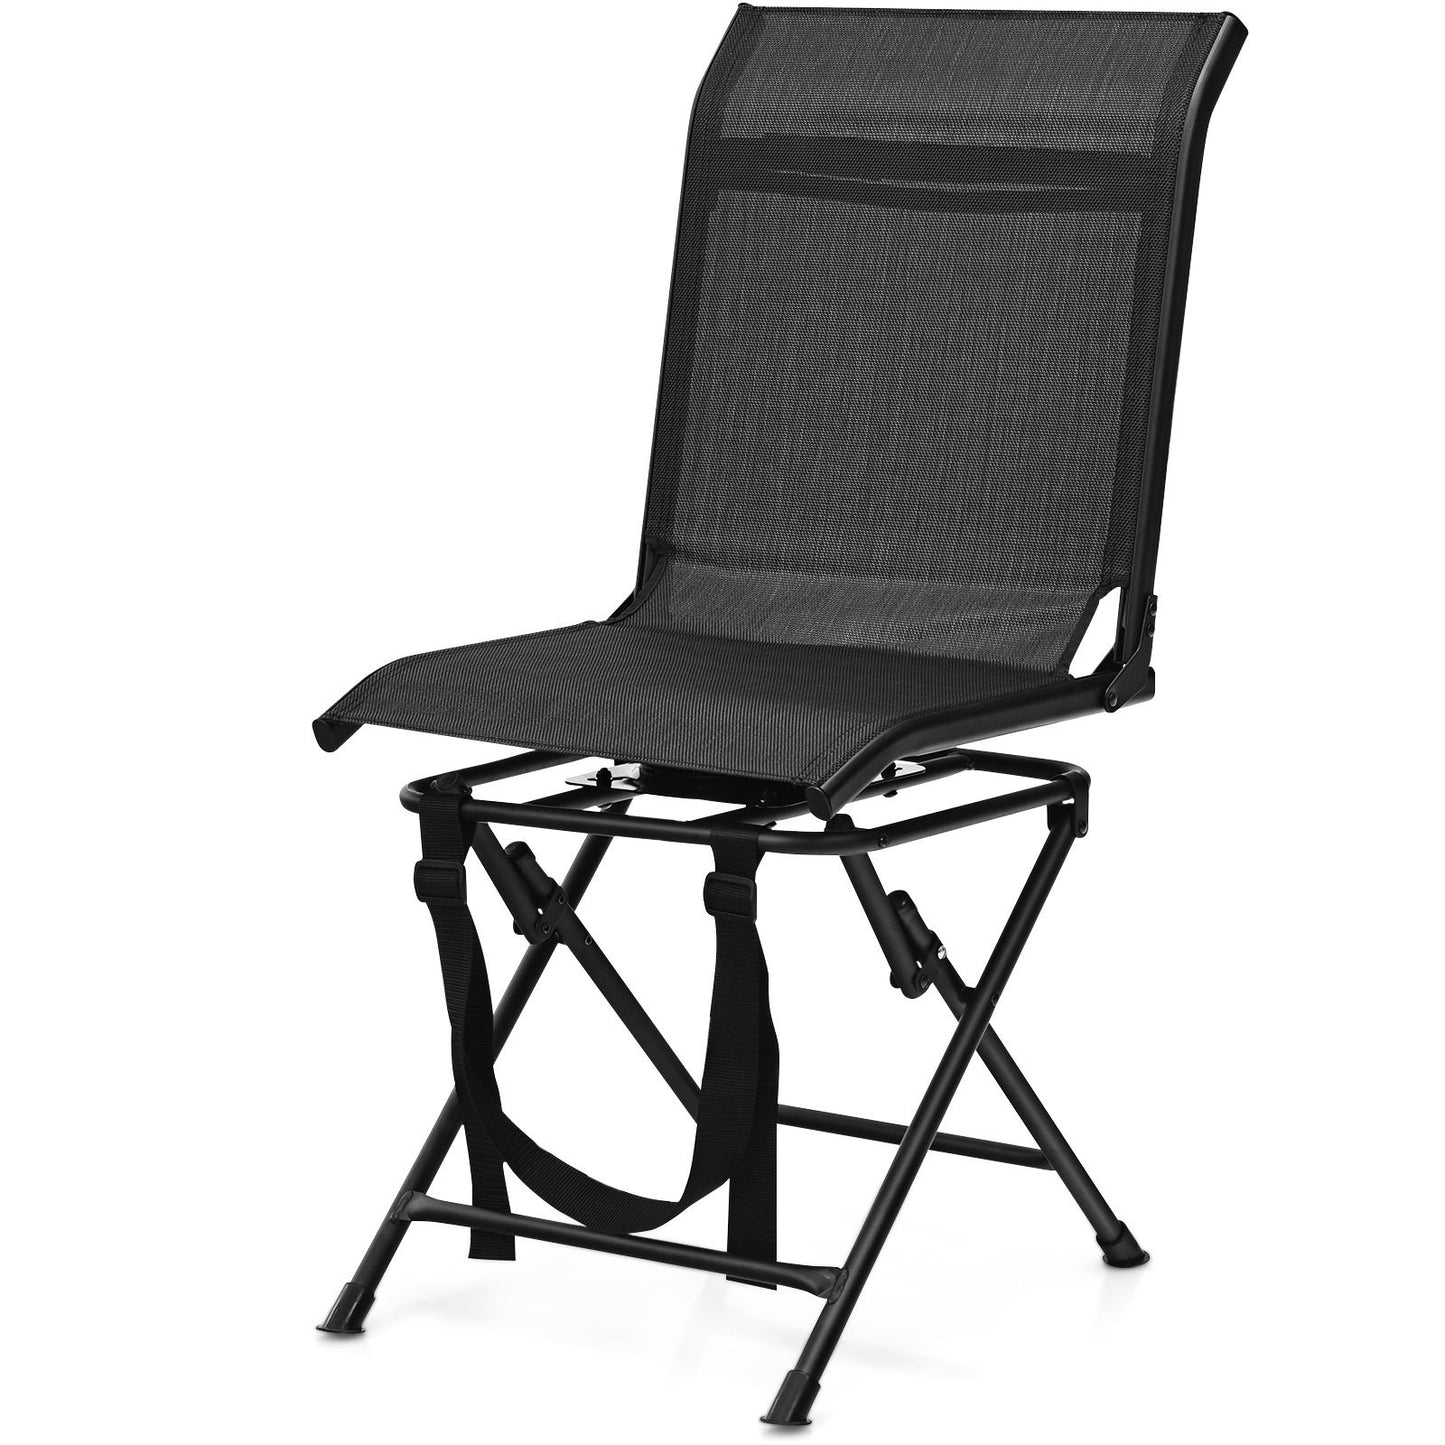 All-weather Outdoor Foldable 360-Degree Swivel Chair with Iron Frame, Black - Gallery Canada